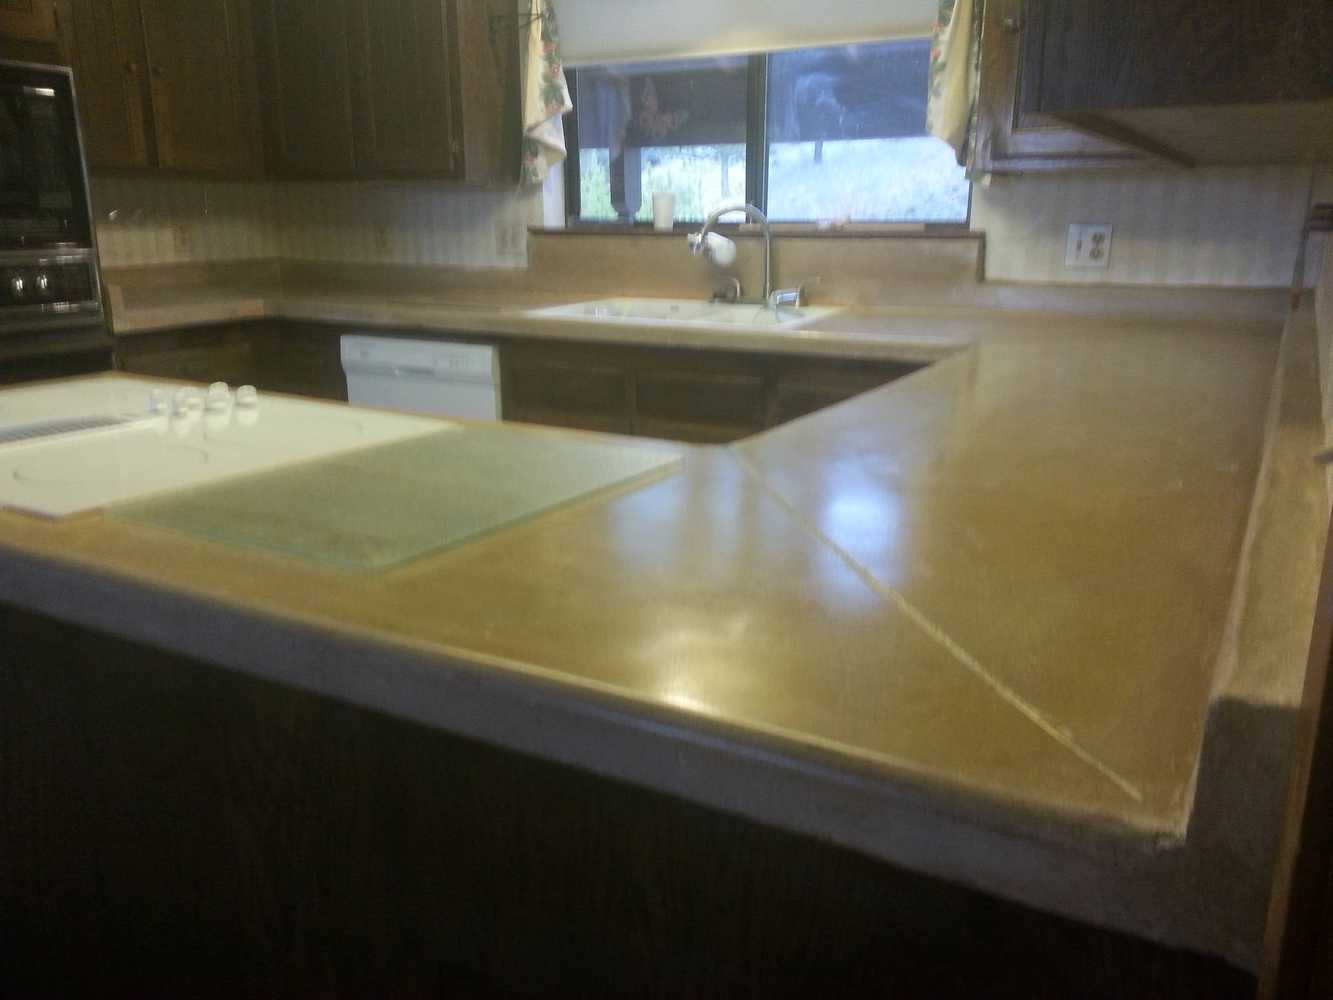 Custom poured in place monolithically poured backsplash and countertop